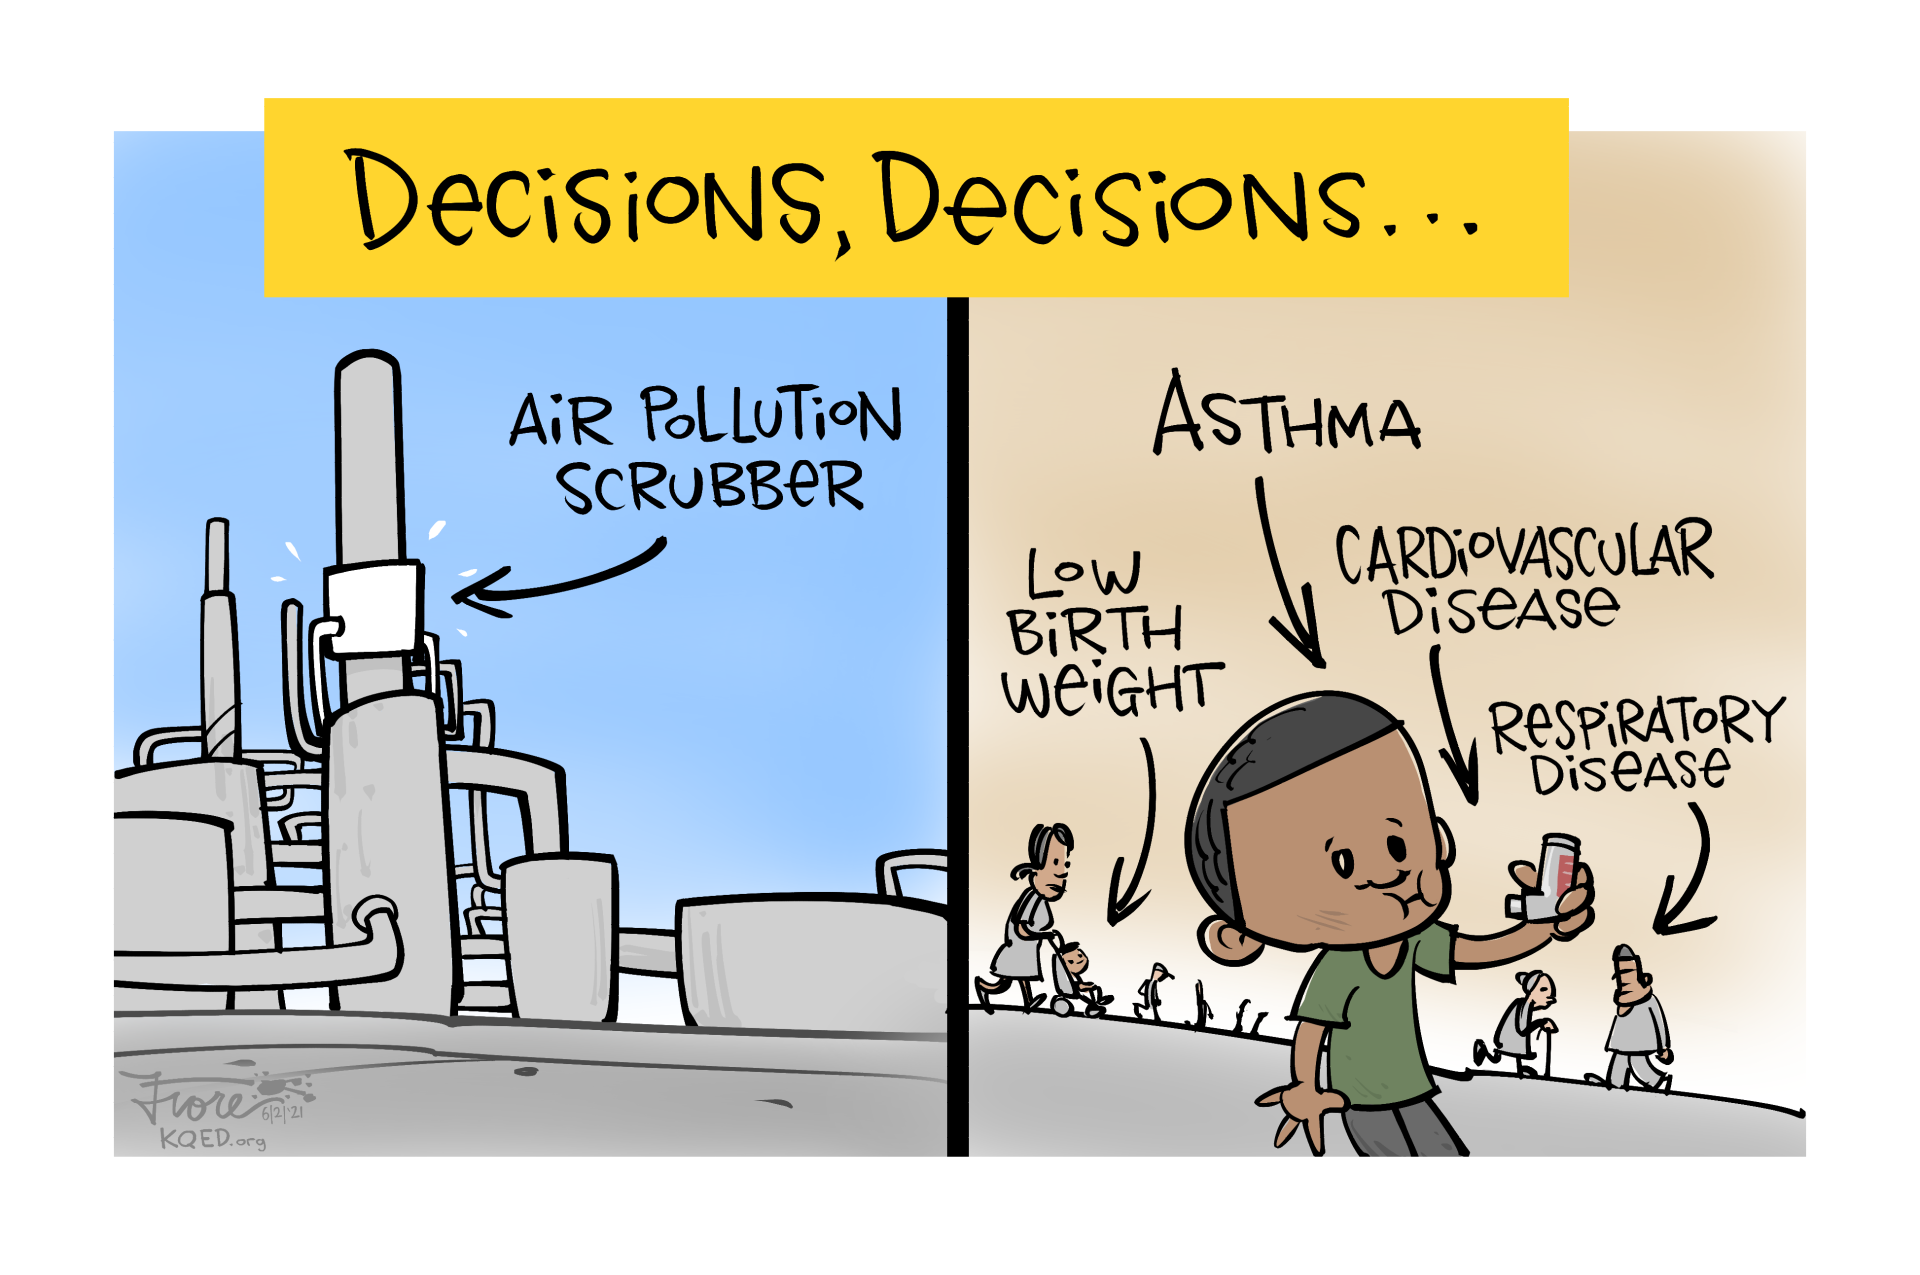 A Mark Fiore cartoon about Bay Area oil refineries and the Bay Area Air Quality Management District captioned, "decisions, decisions." The cartoon shows a refinery on the left with an "air pollution scrubber" and on the right, a community of people of color with asthma, low birth weight, cardiovascular disease and respiratory disease.